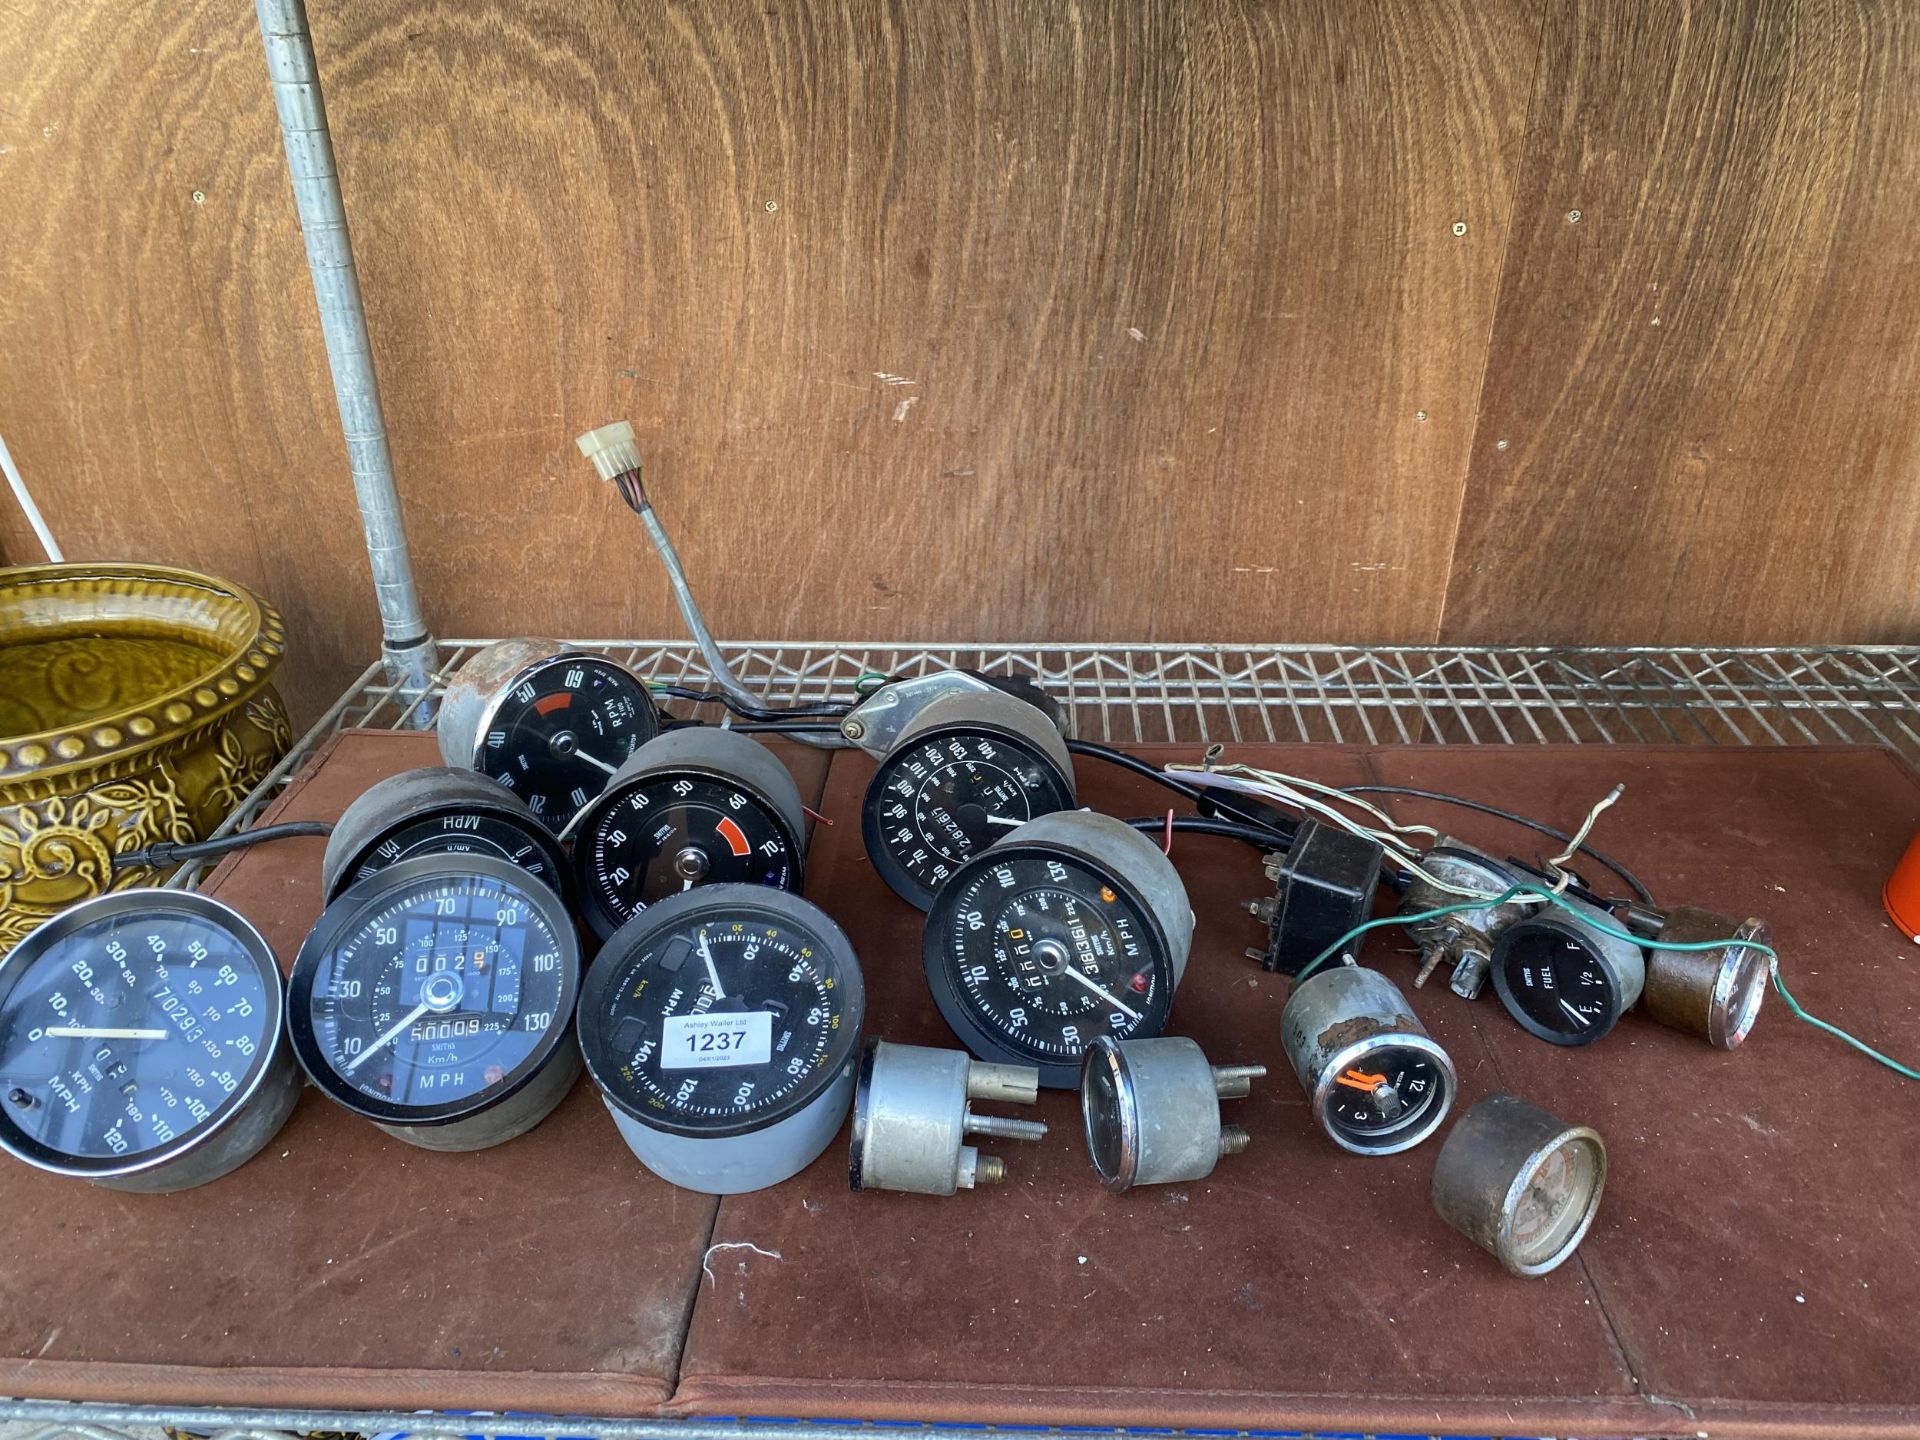 AN ASSORTMENT OF VINTAGE AUTOMOBILE DASHBOARD GAUGES TO INCLUDE SPEEDOMETERS, CLOCKS AND OIL